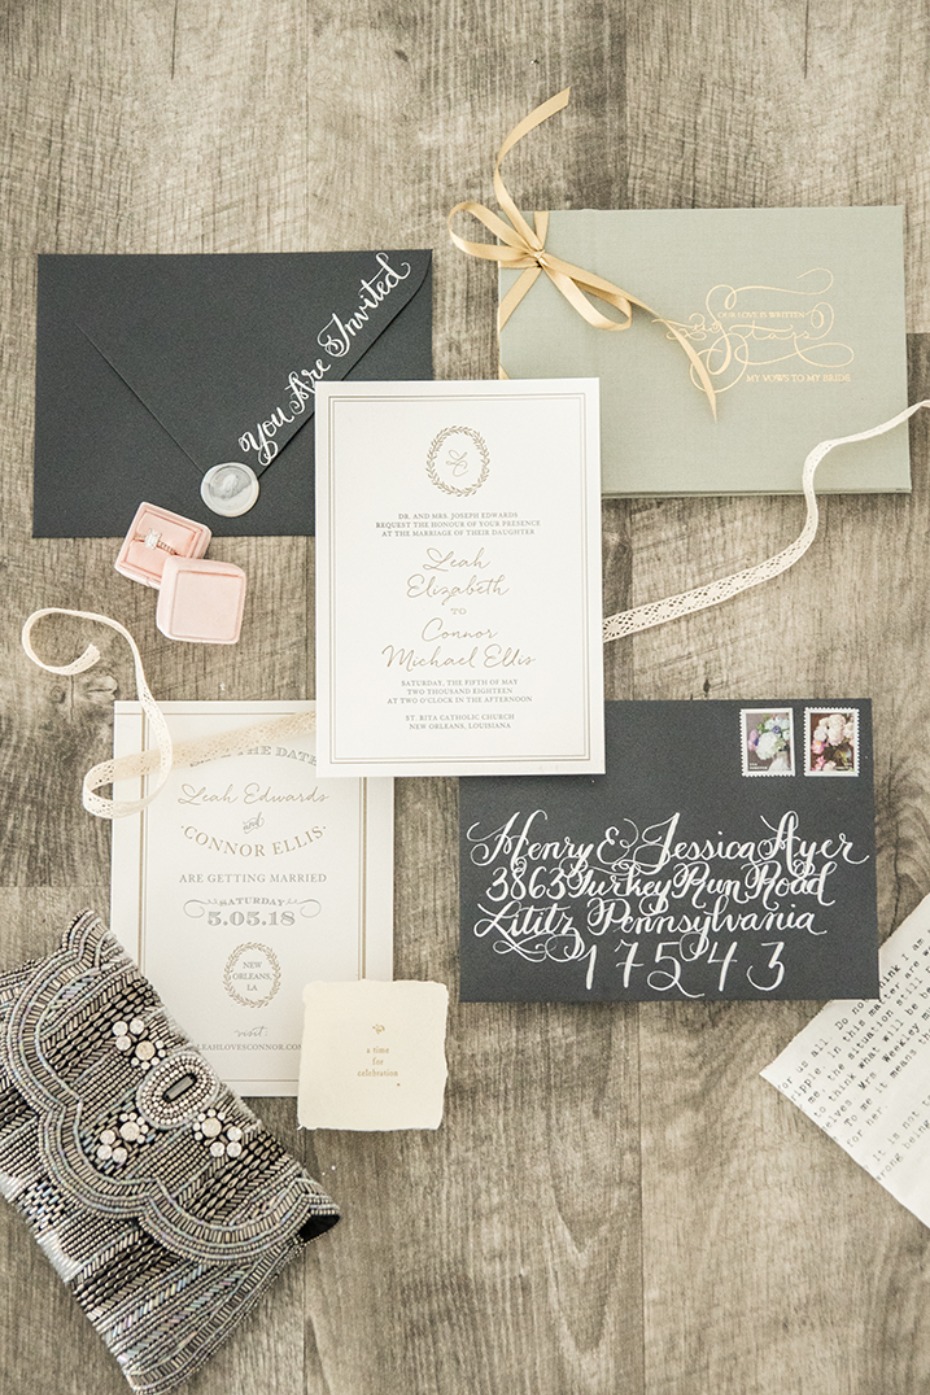 classic wedding invitation style with a modern flair